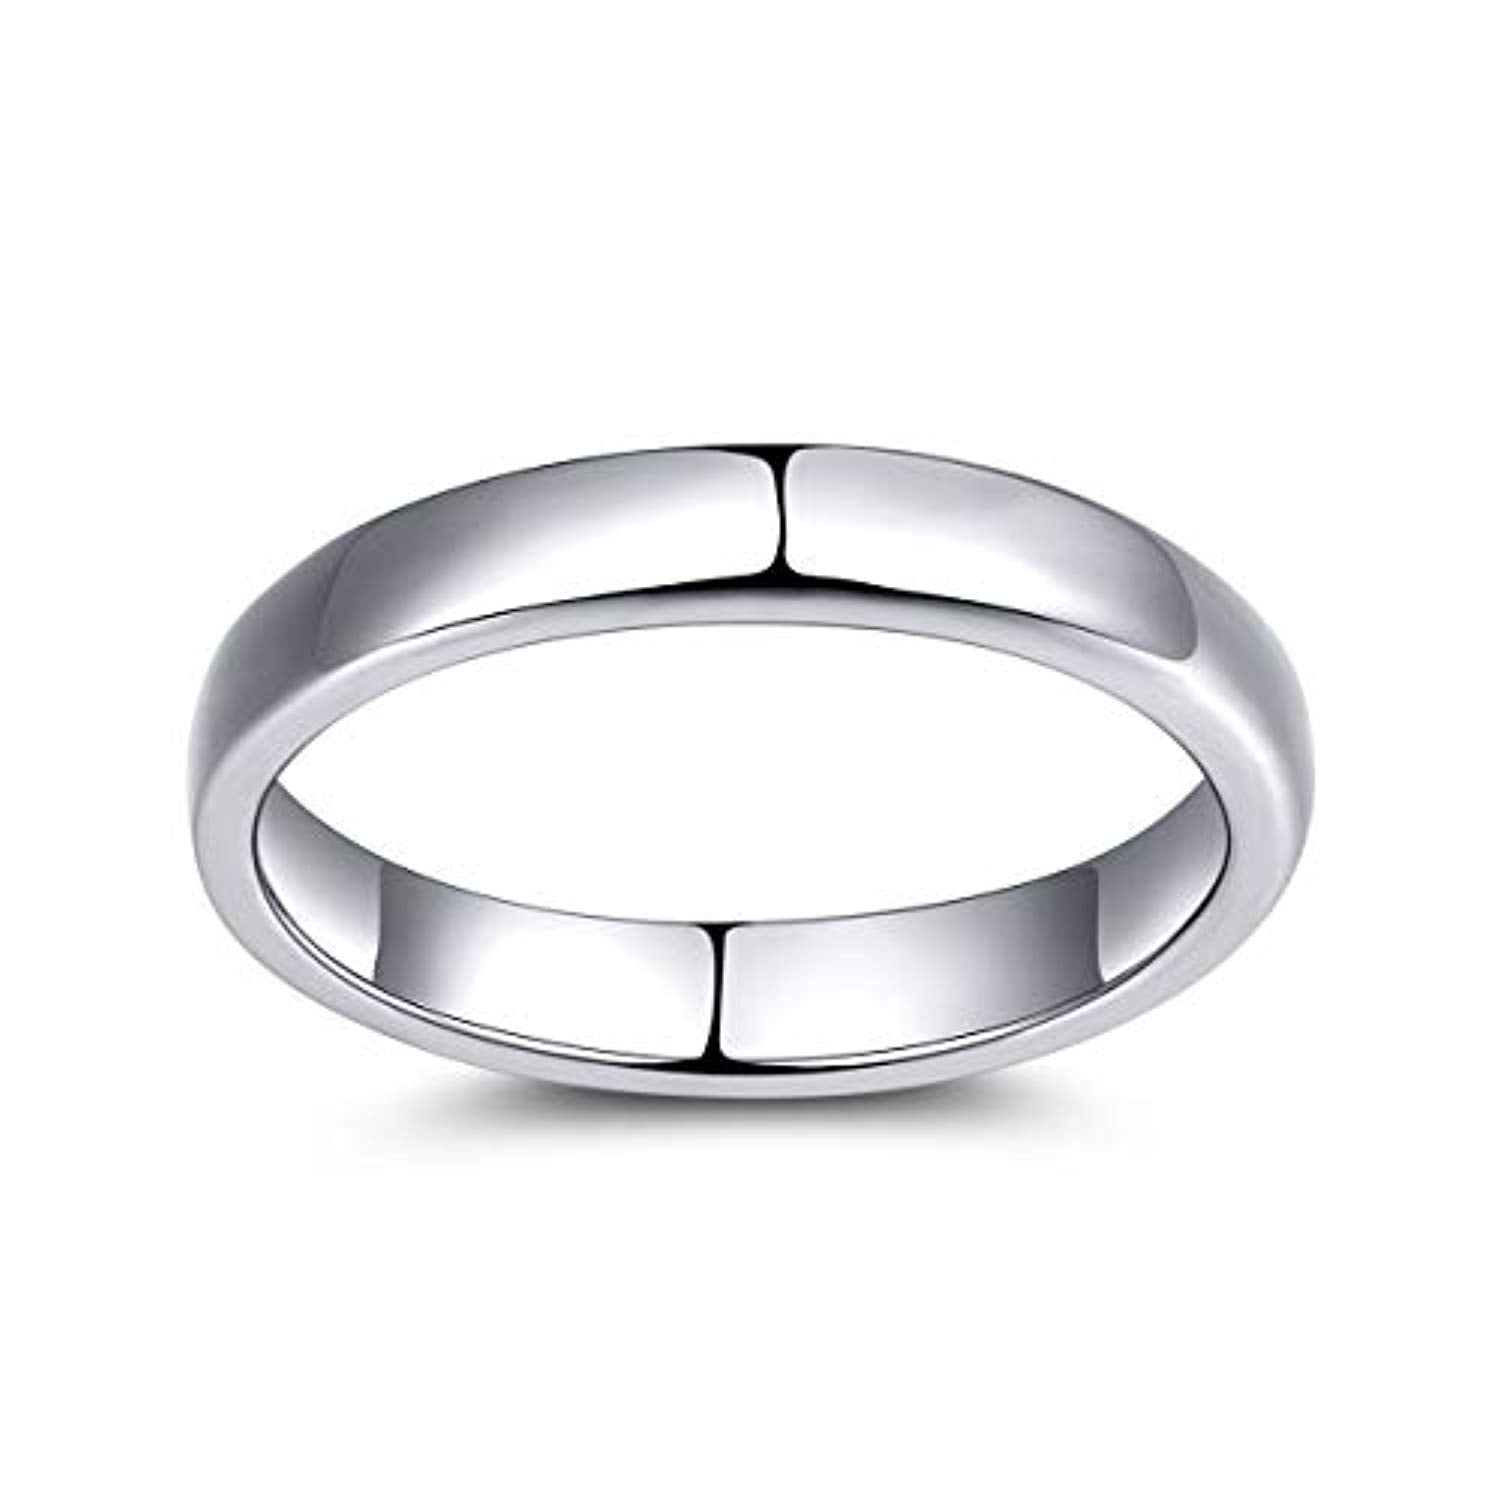 925 Sterling Silver Dome High Polish Plain Ring Wedding Band Comfort Fit